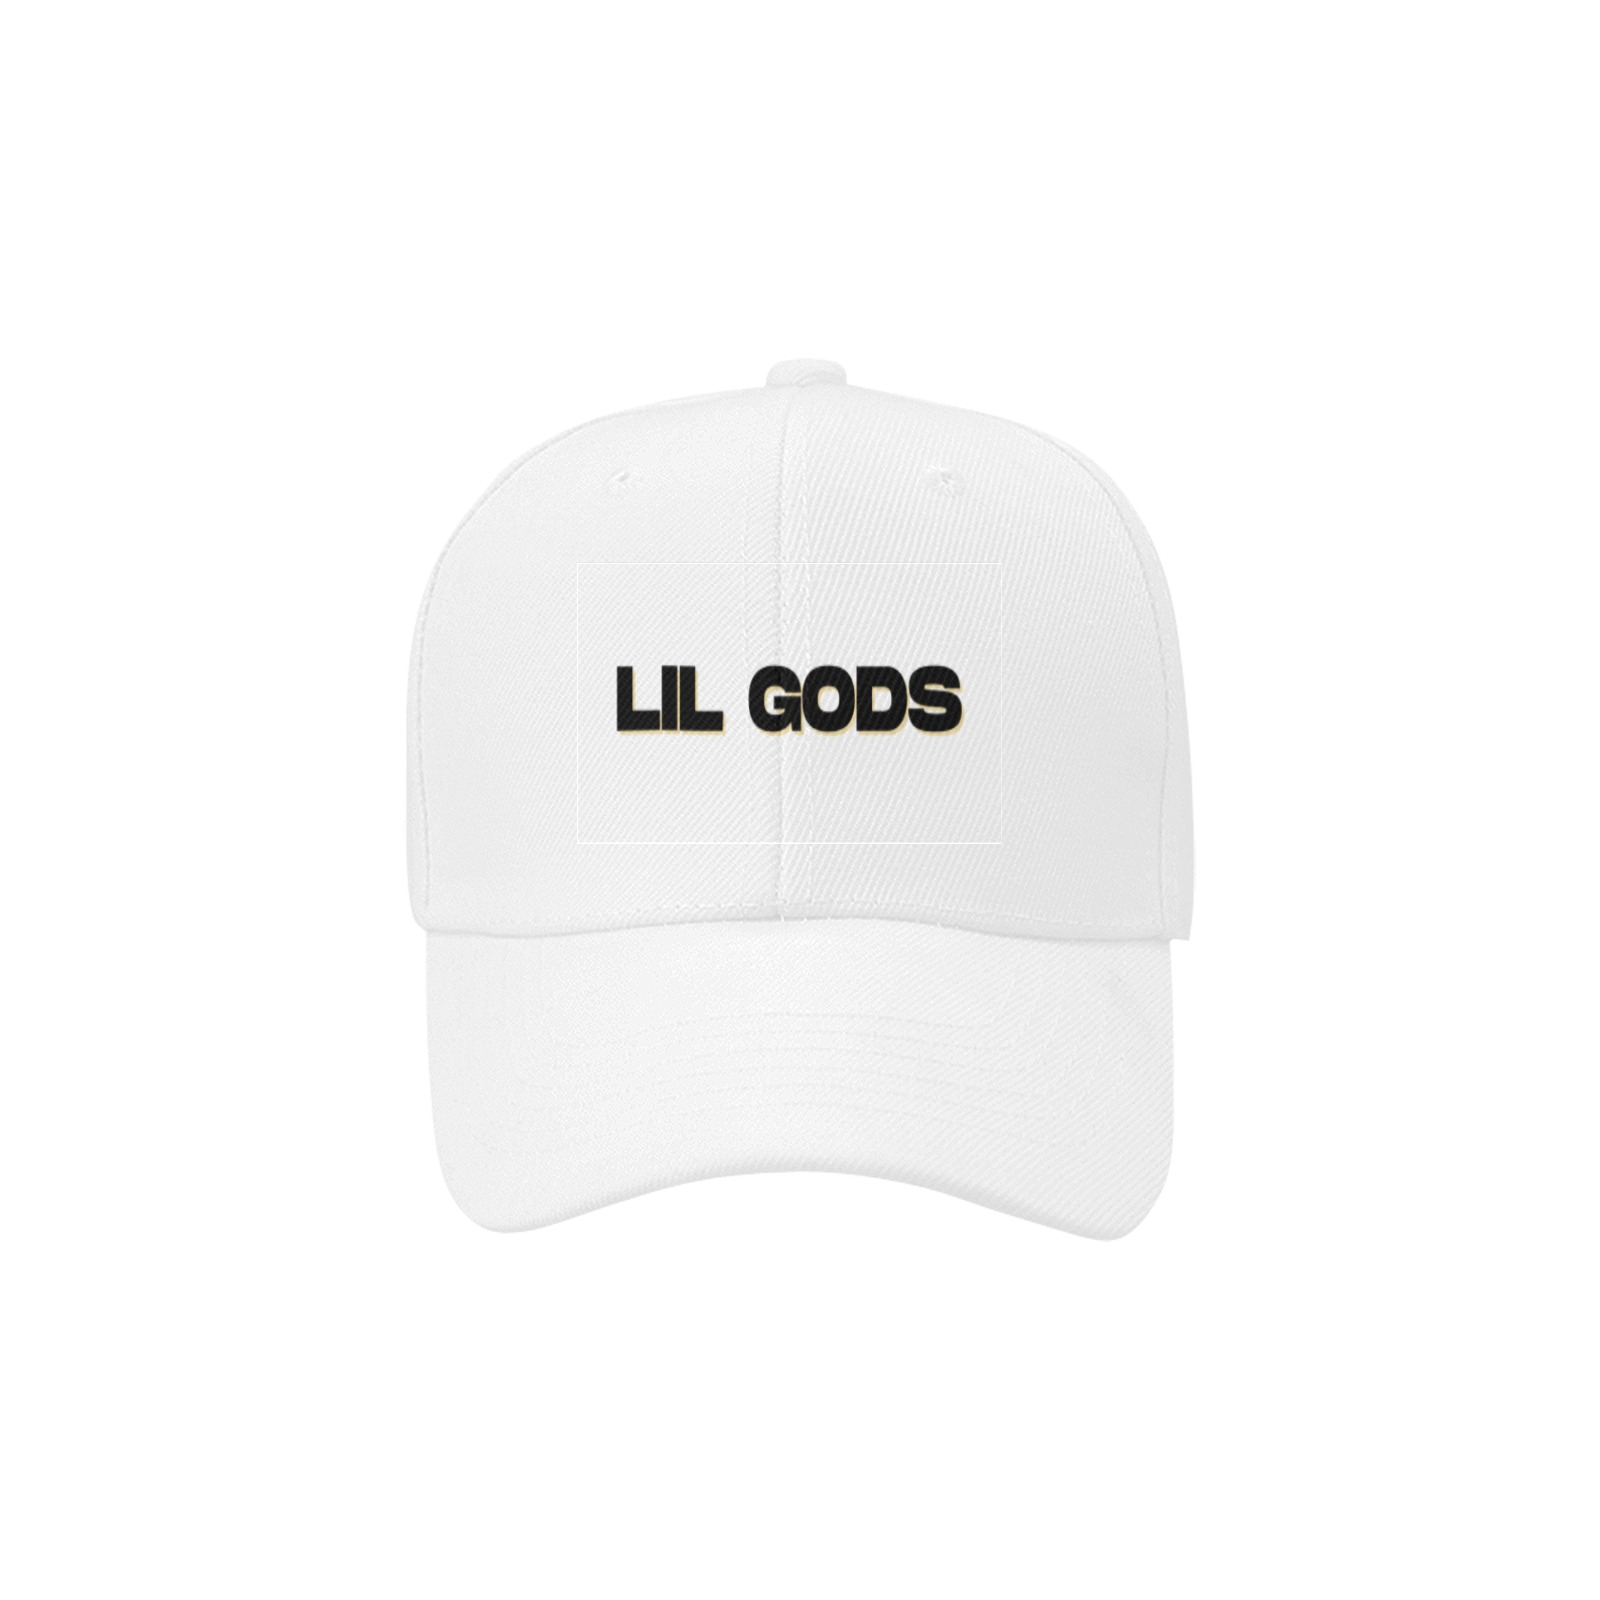 Lil Gods Black and White Dad Cap